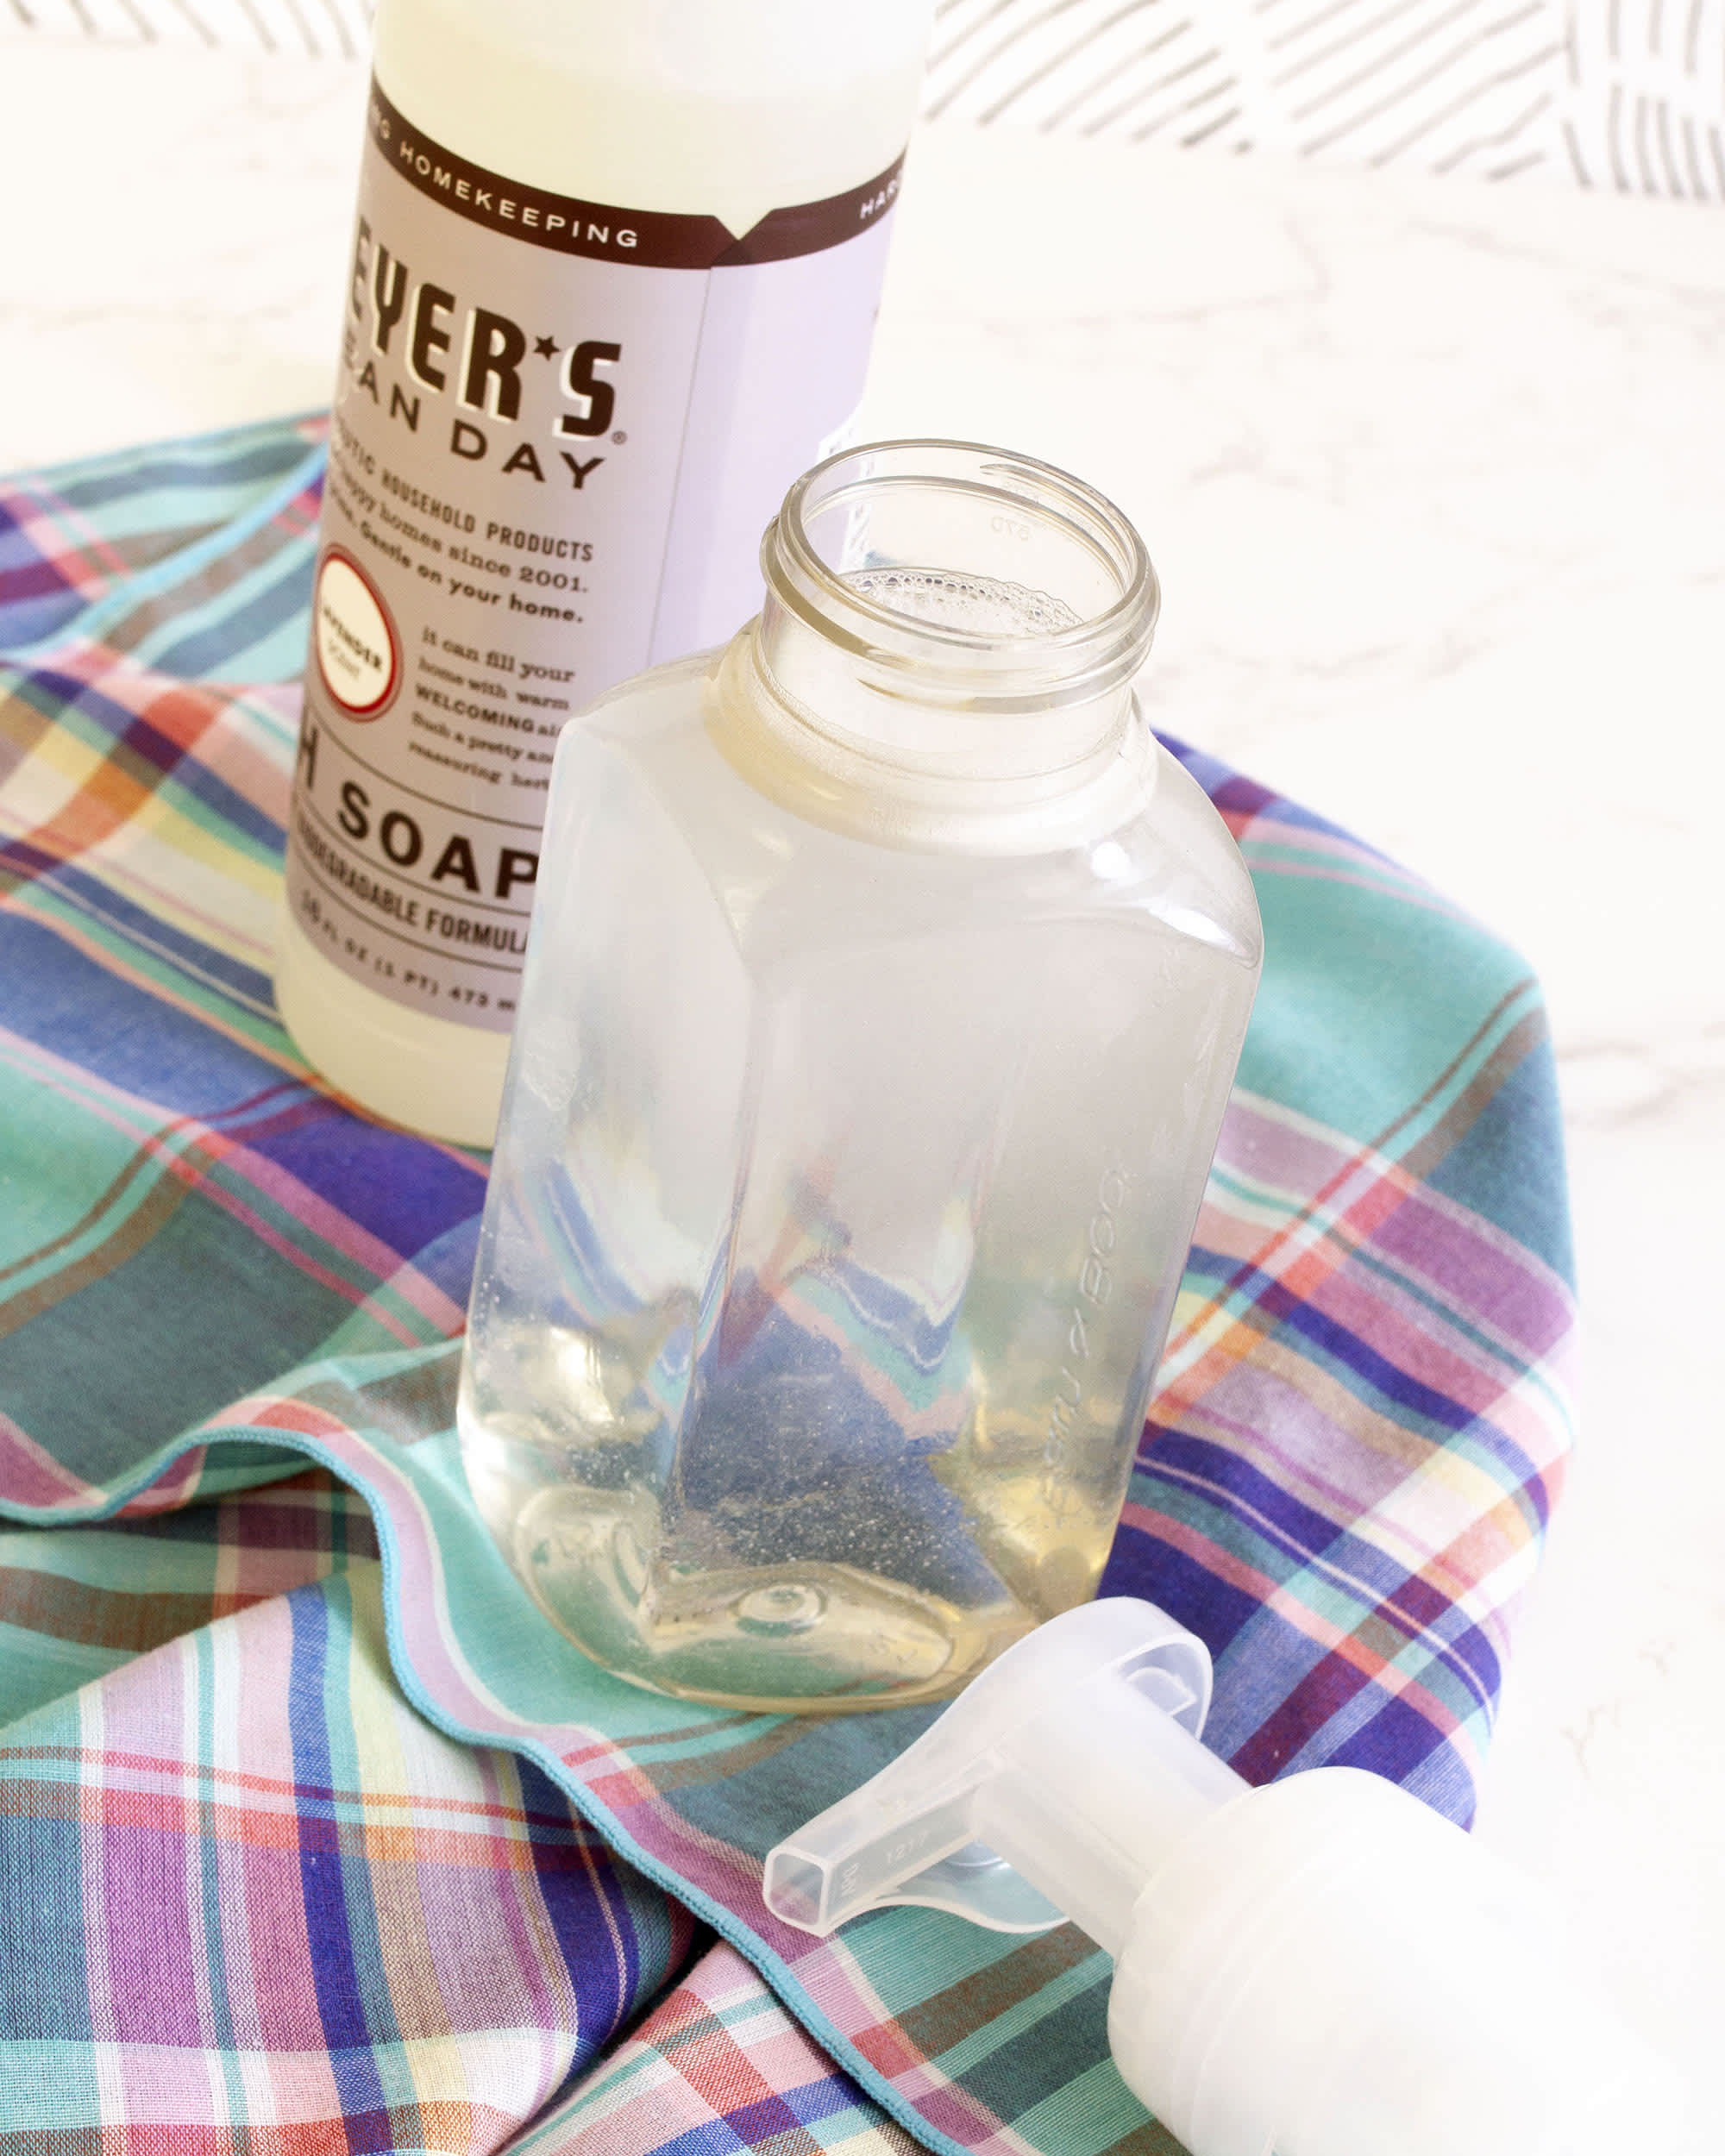 How to Make Your Own Foaming Hand Soap